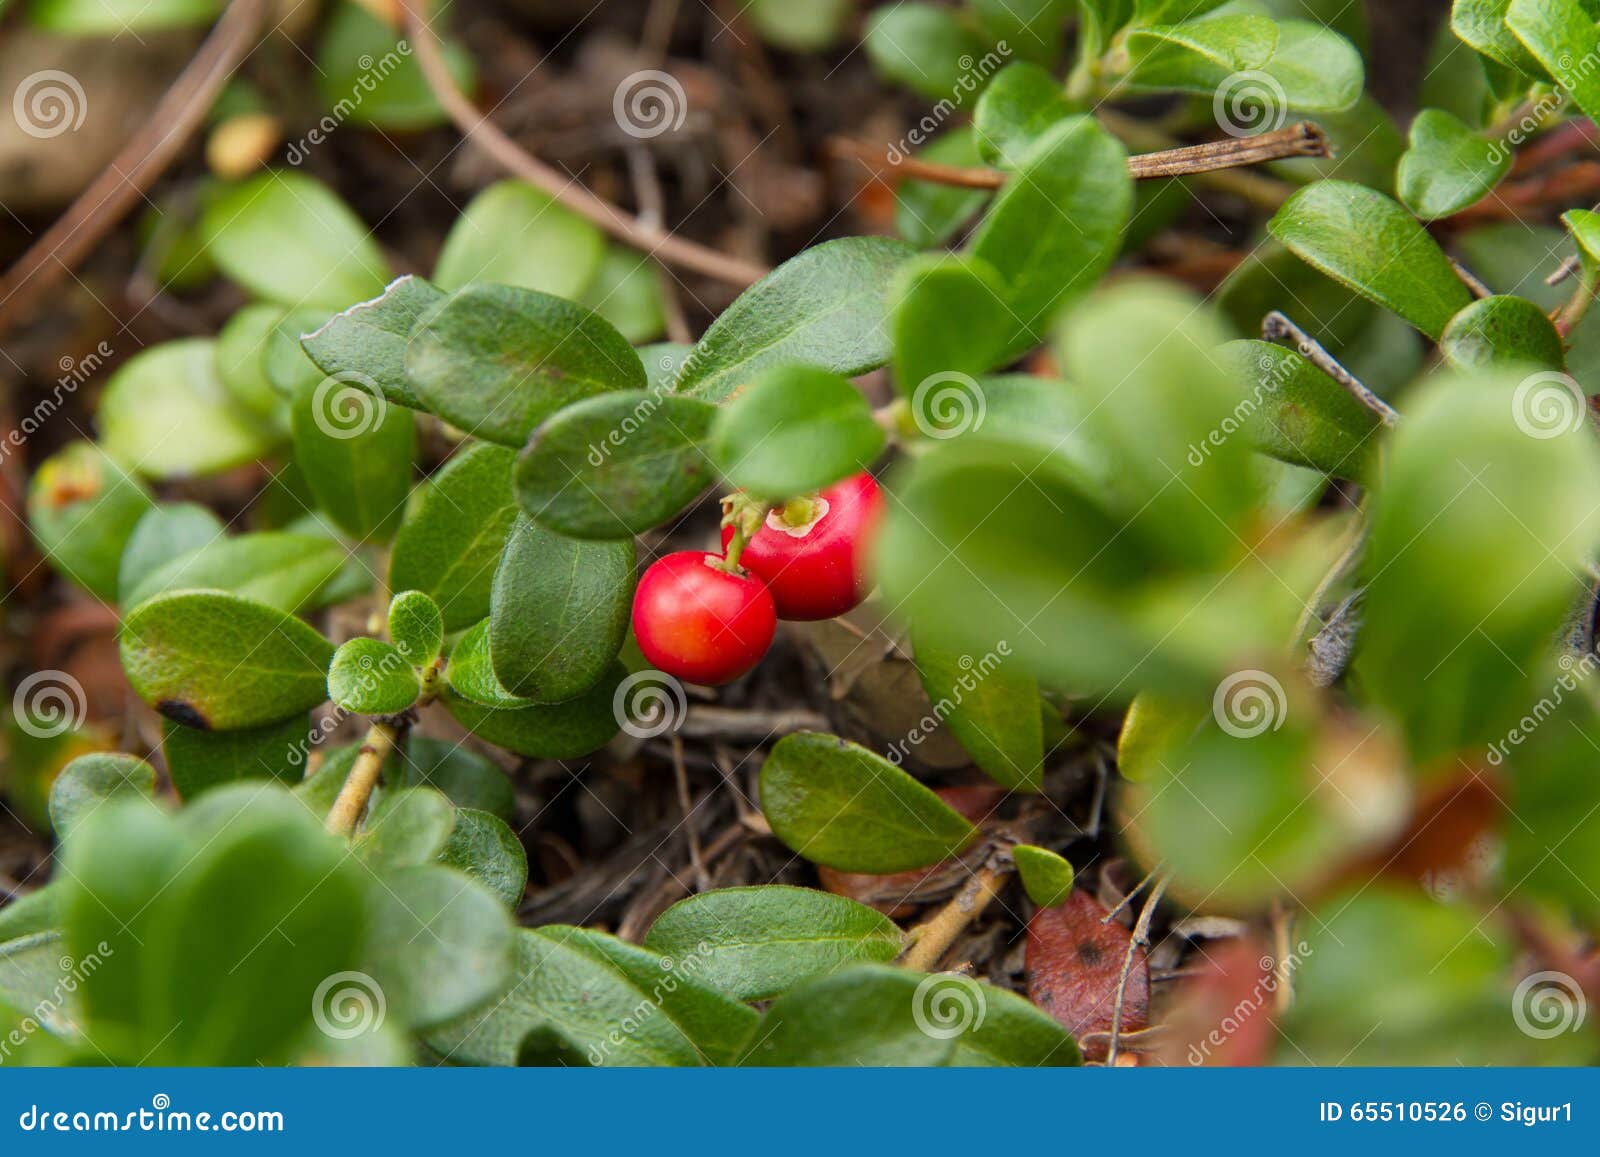 bearberry plant with fruits red